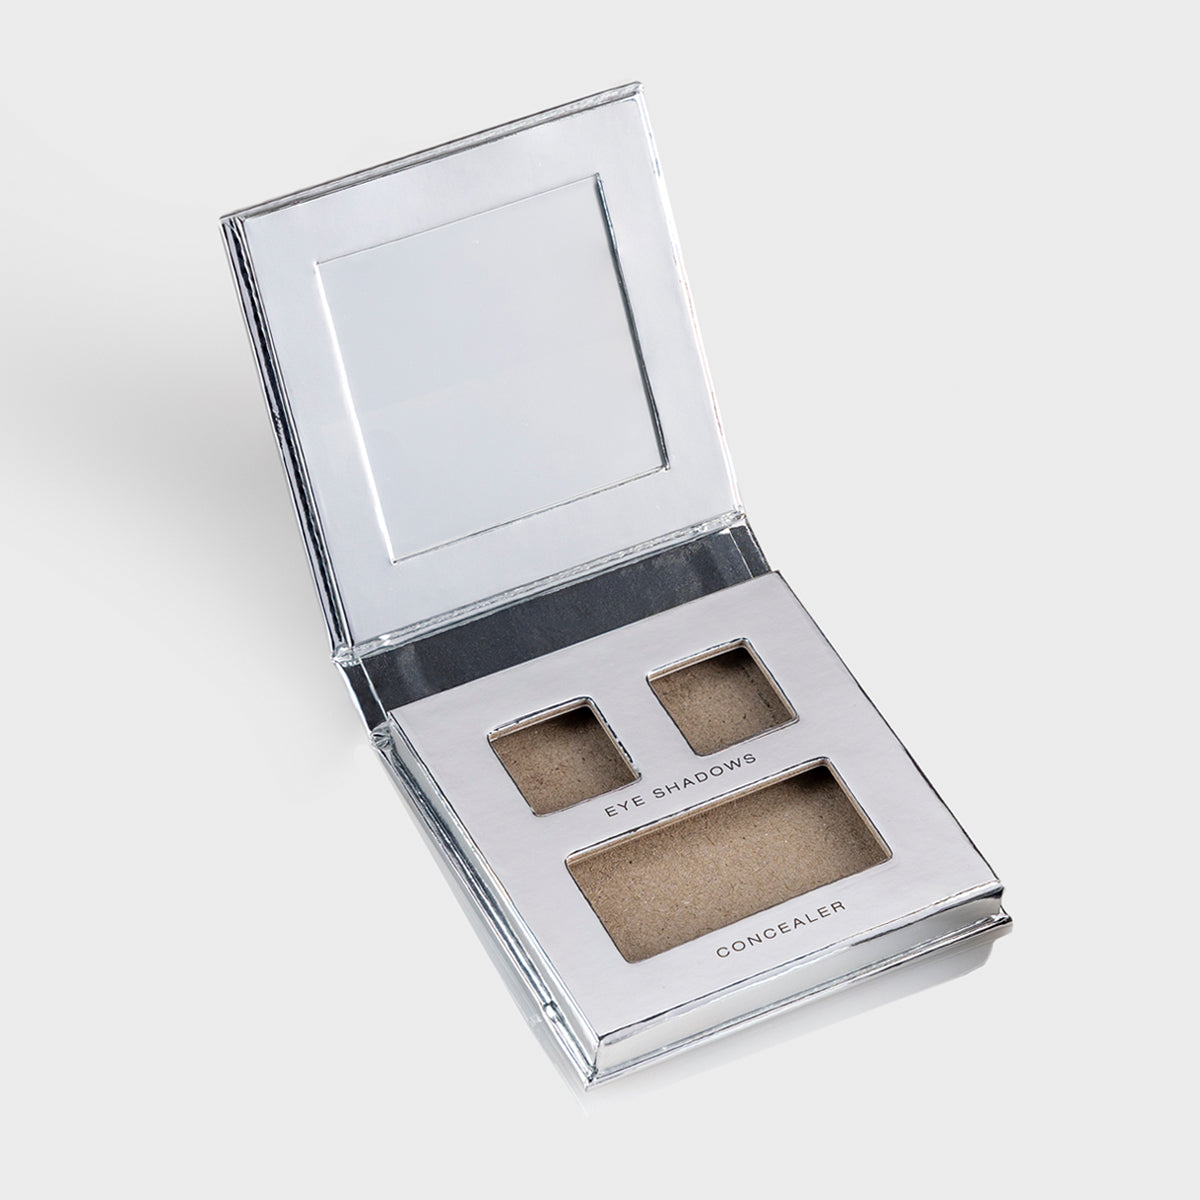 a photo of an empty silver makeup palette with mirrored flap and slots for 2 eye shadows and 1 concealer